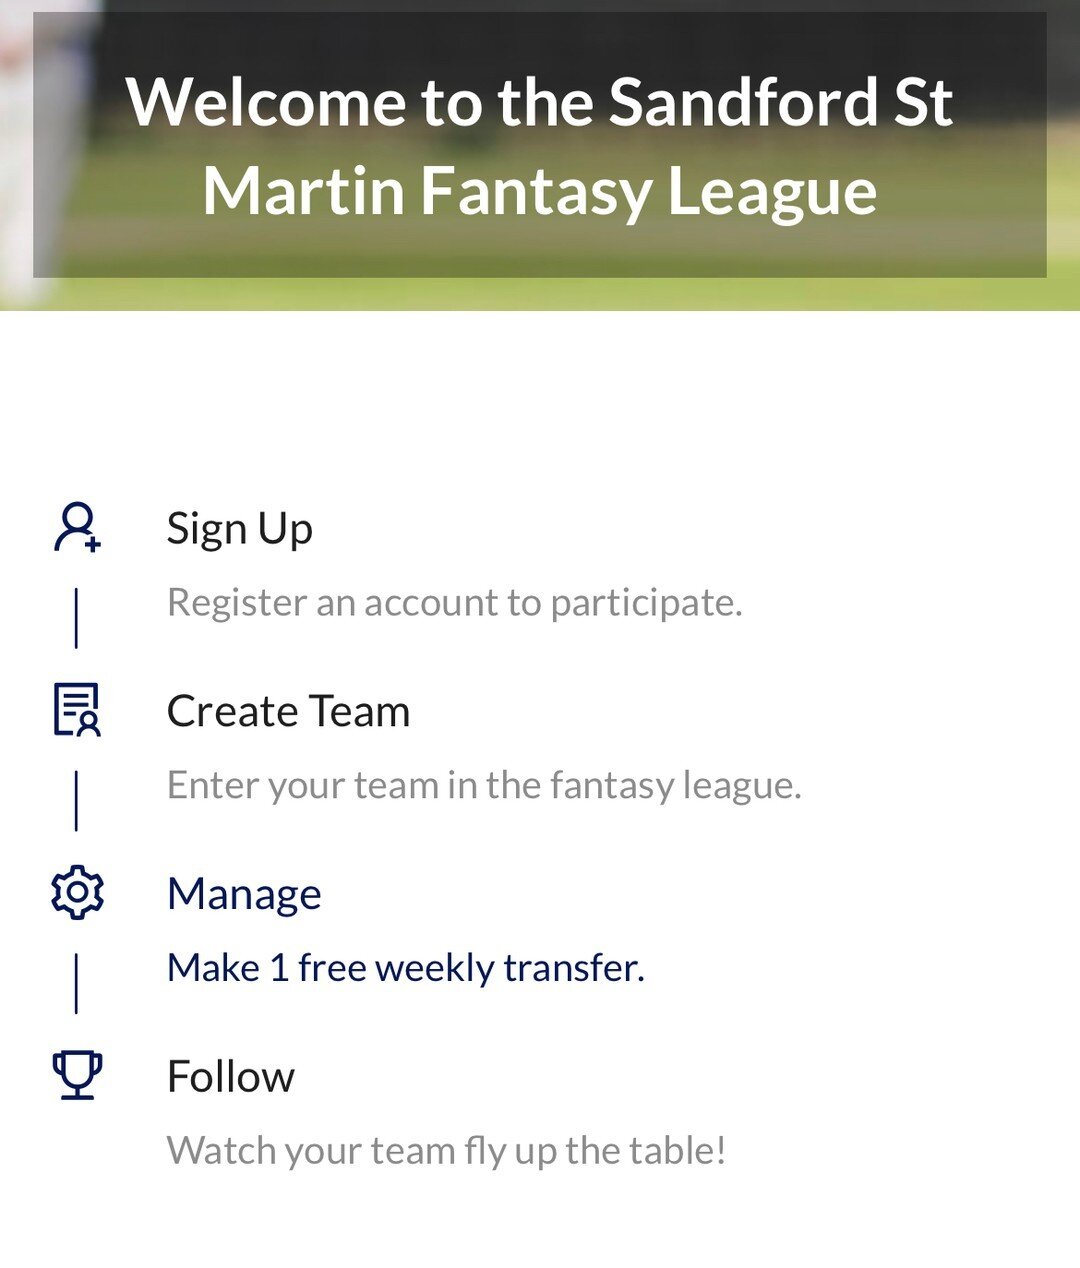 There&rsquo;s a SandfordCricket fantasy league this year! 
&pound;10 entry and the winner gets 50% of the pot! Enter here http://ow.ly/aIGE50Oblcb

#sandfordcricket #sandfordstmartin #cricket #cherwellcricketleague #fantasycricket #ecb #pointsmeanpri